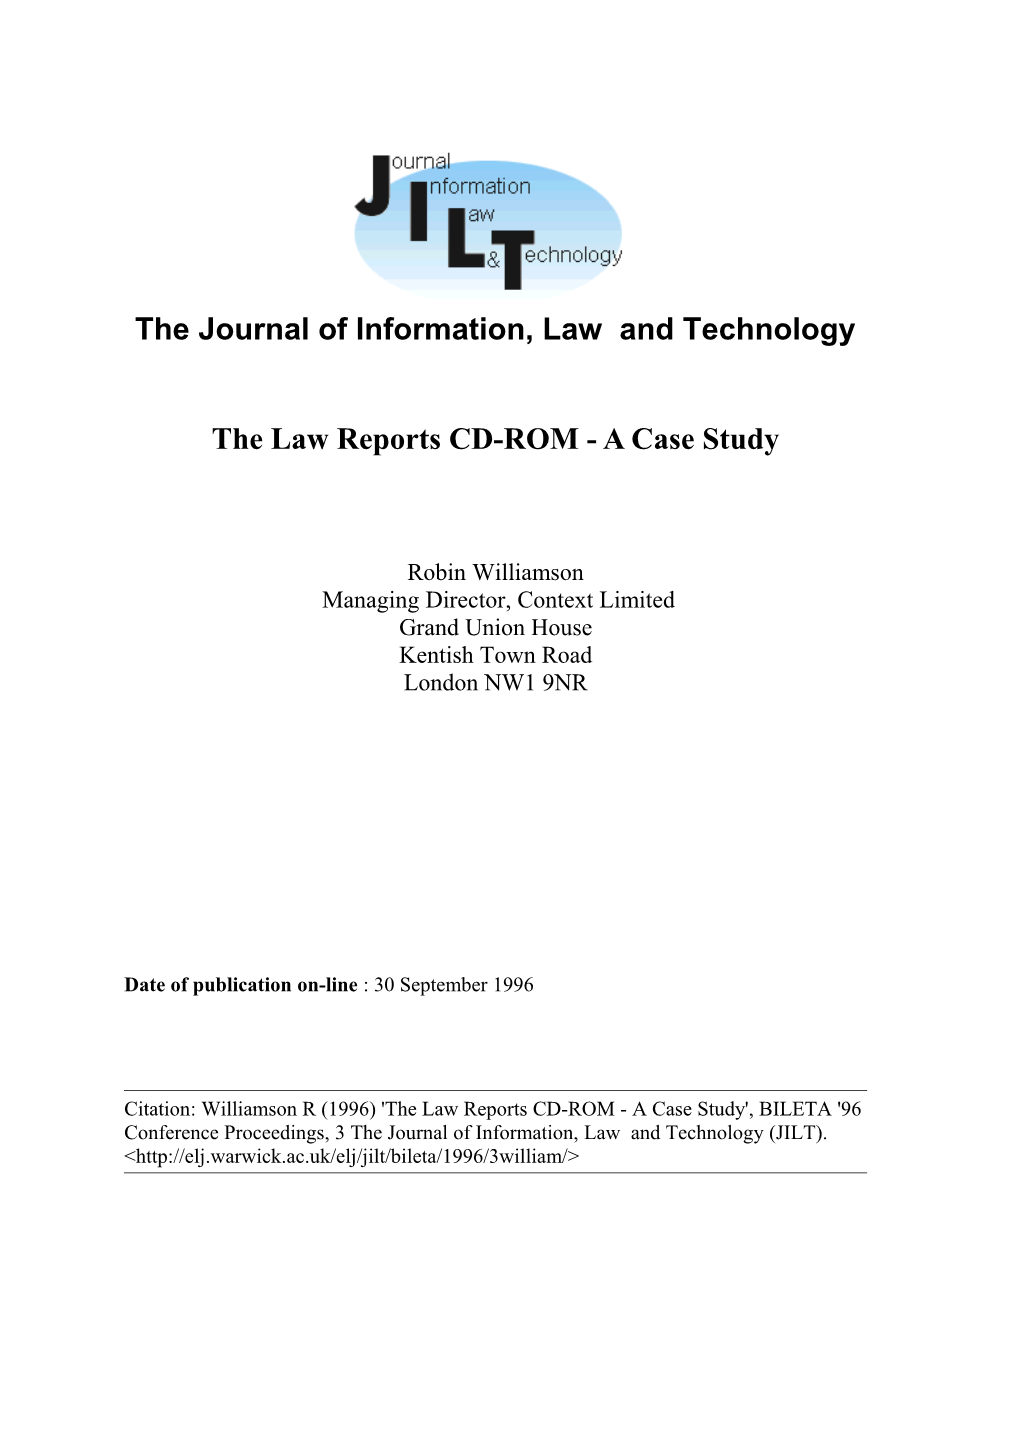 The Journal of Information, Law and Technology